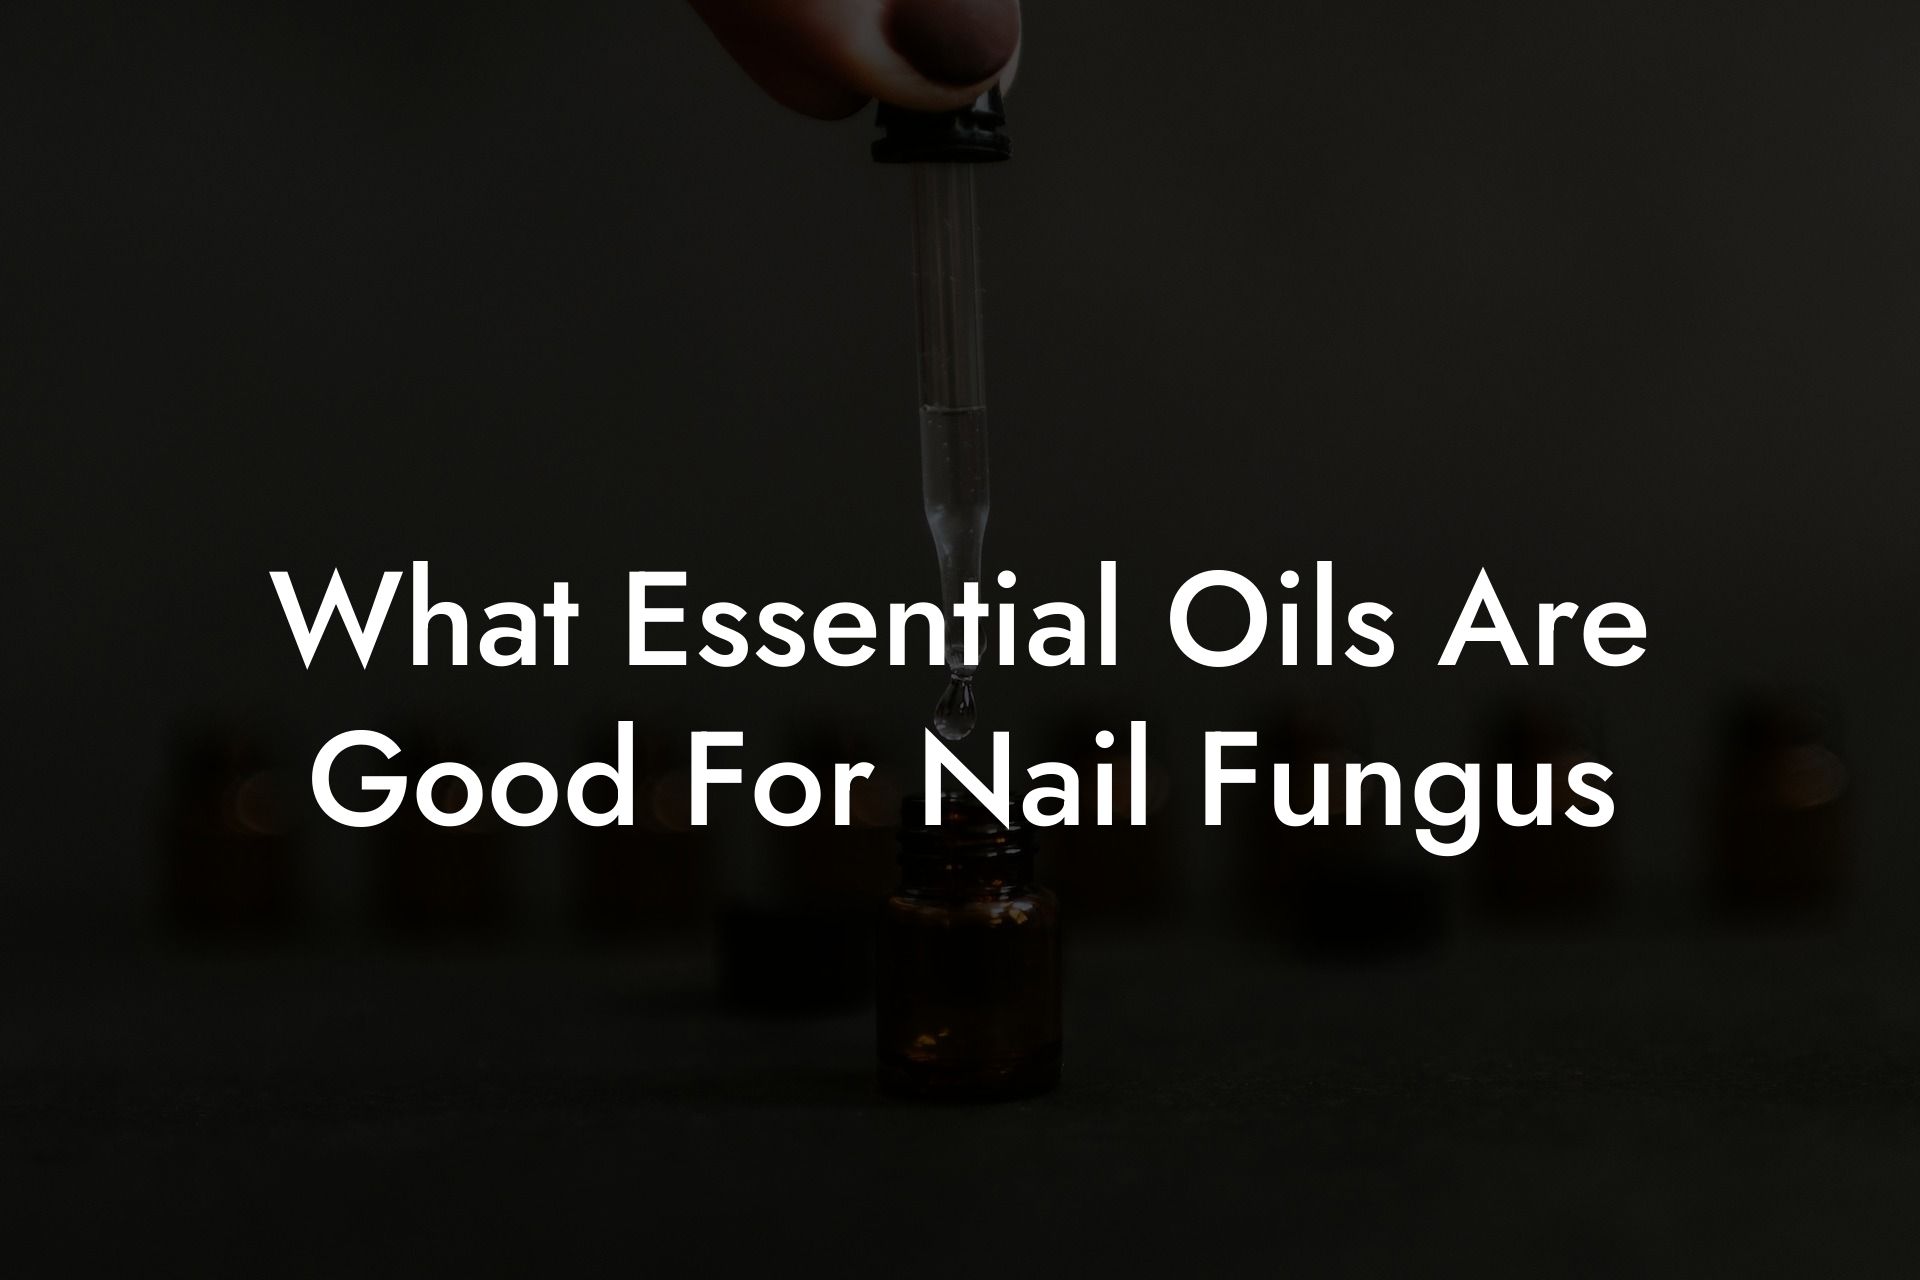 What Essential Oils Are Good For Nail Fungus